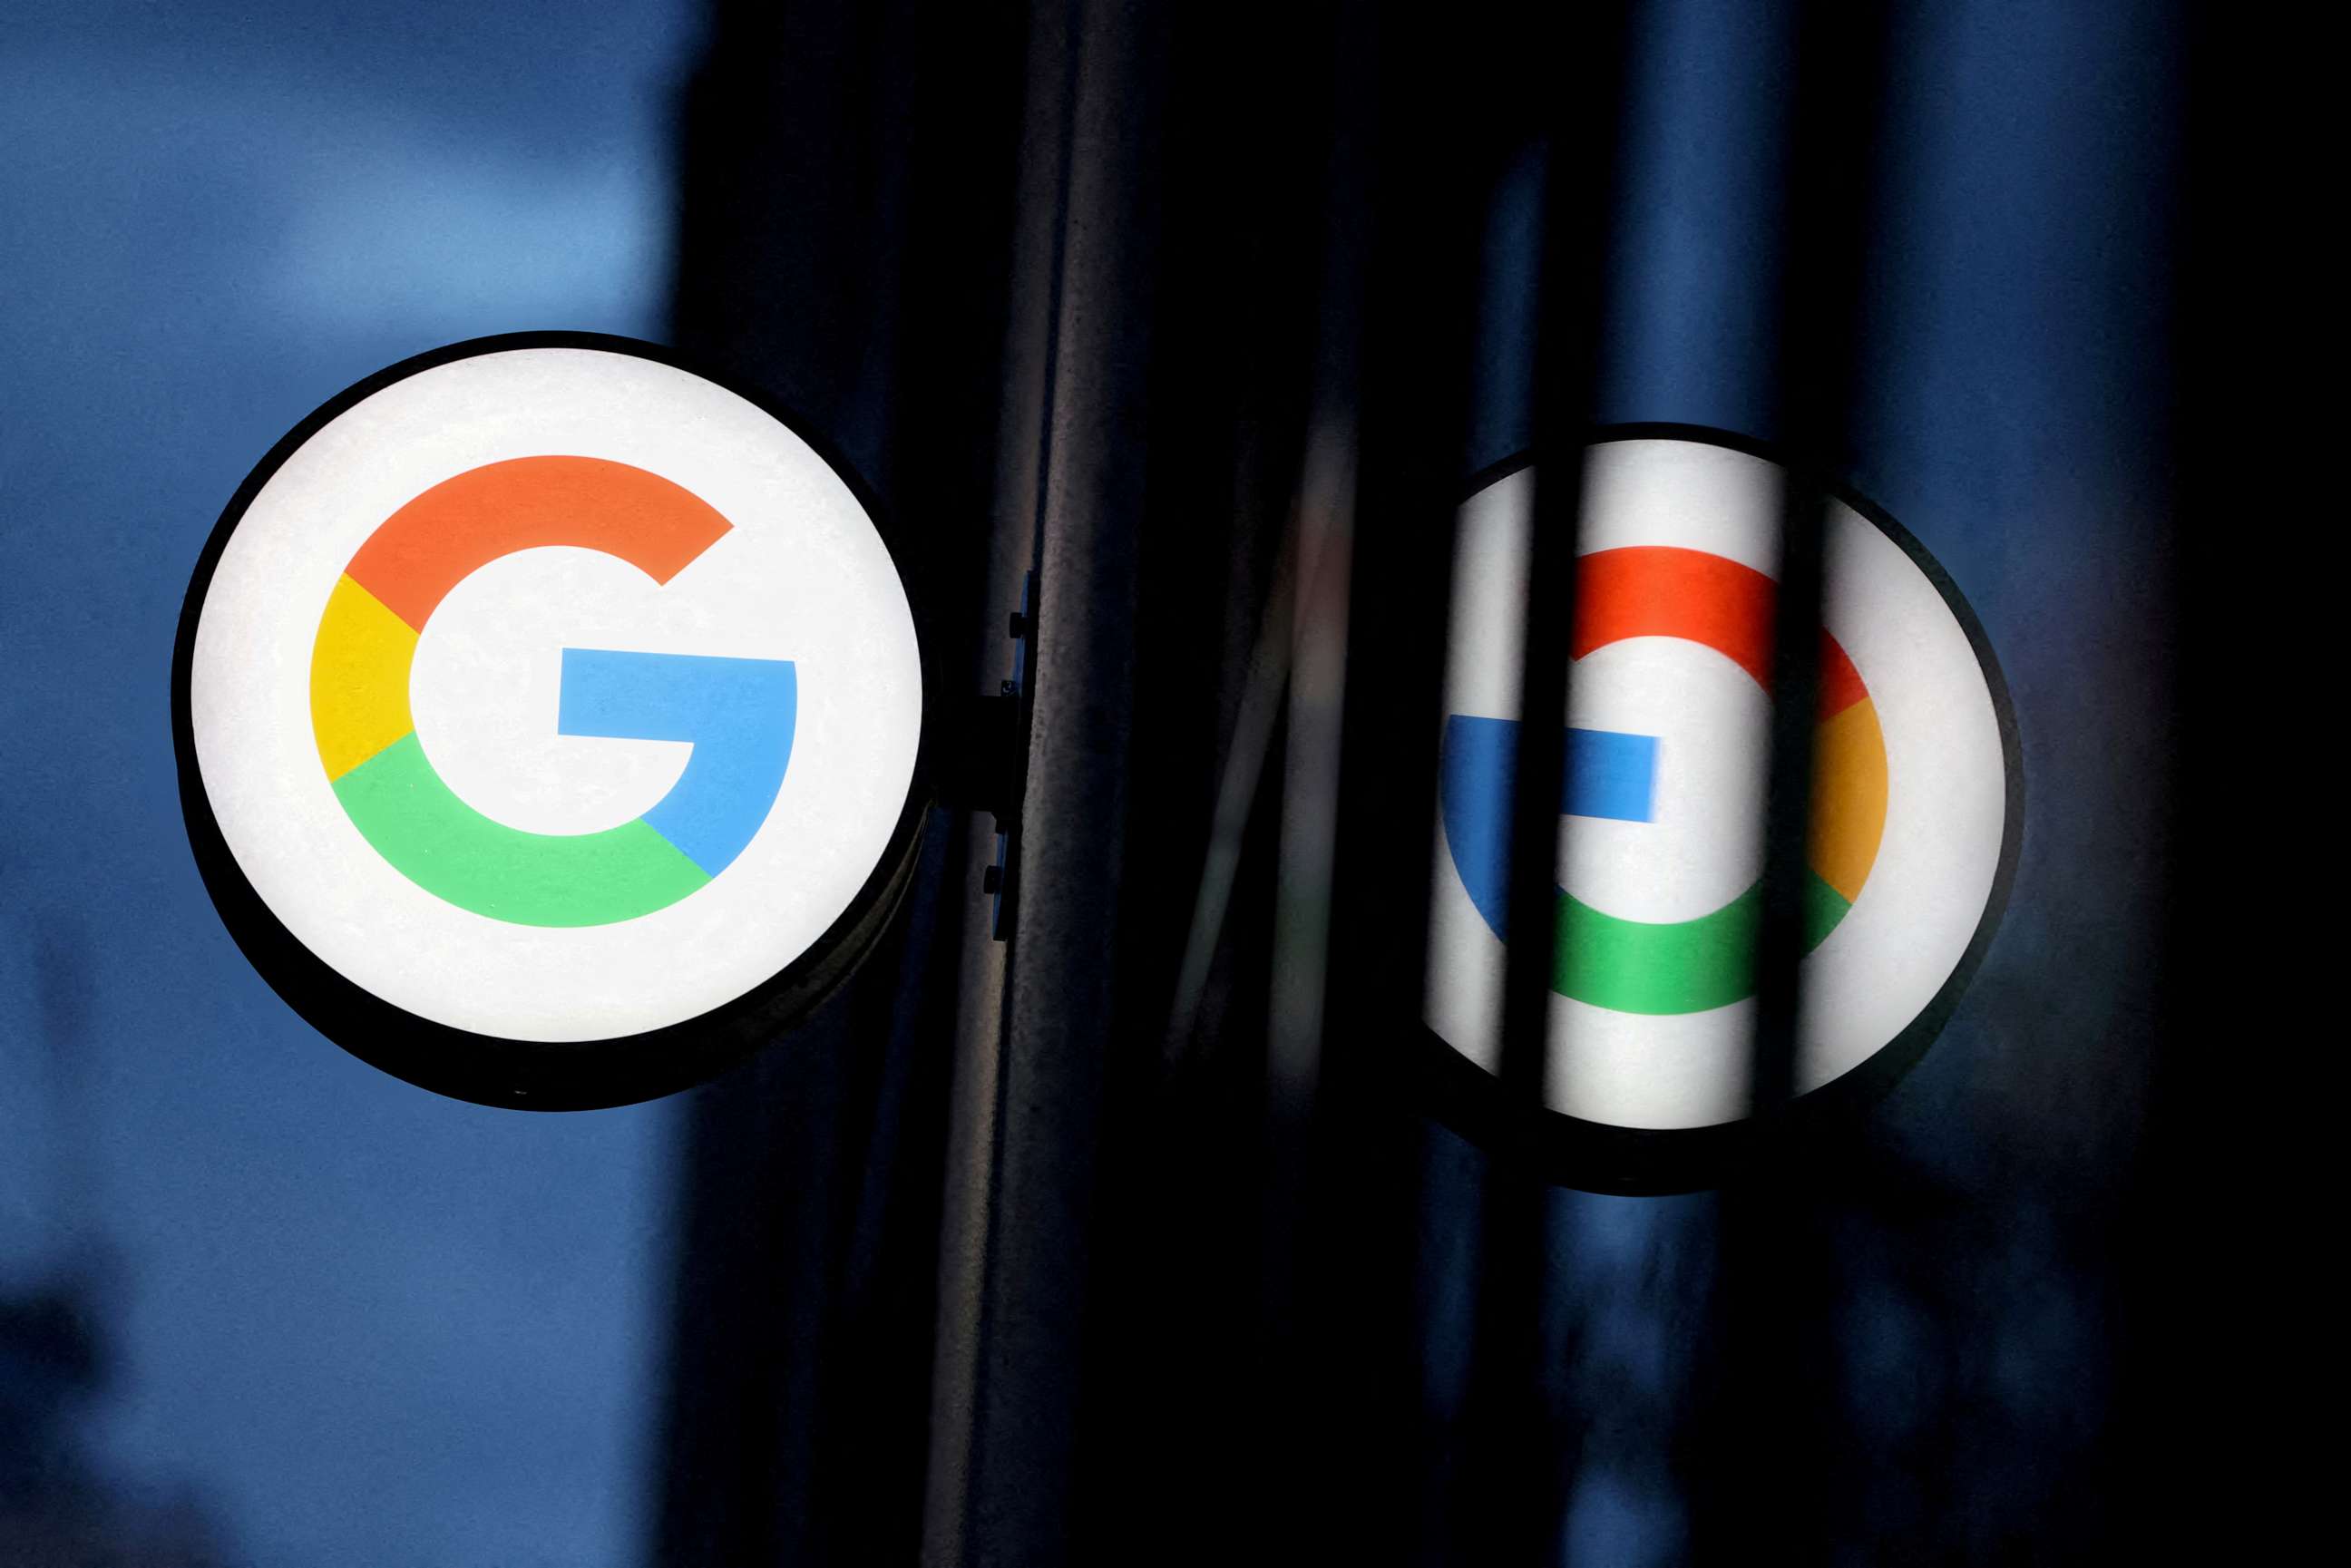 FILE PHOTO: The logo for Google is seen at the Google Store Chelsea in New York City on Nov. 17, 2021.